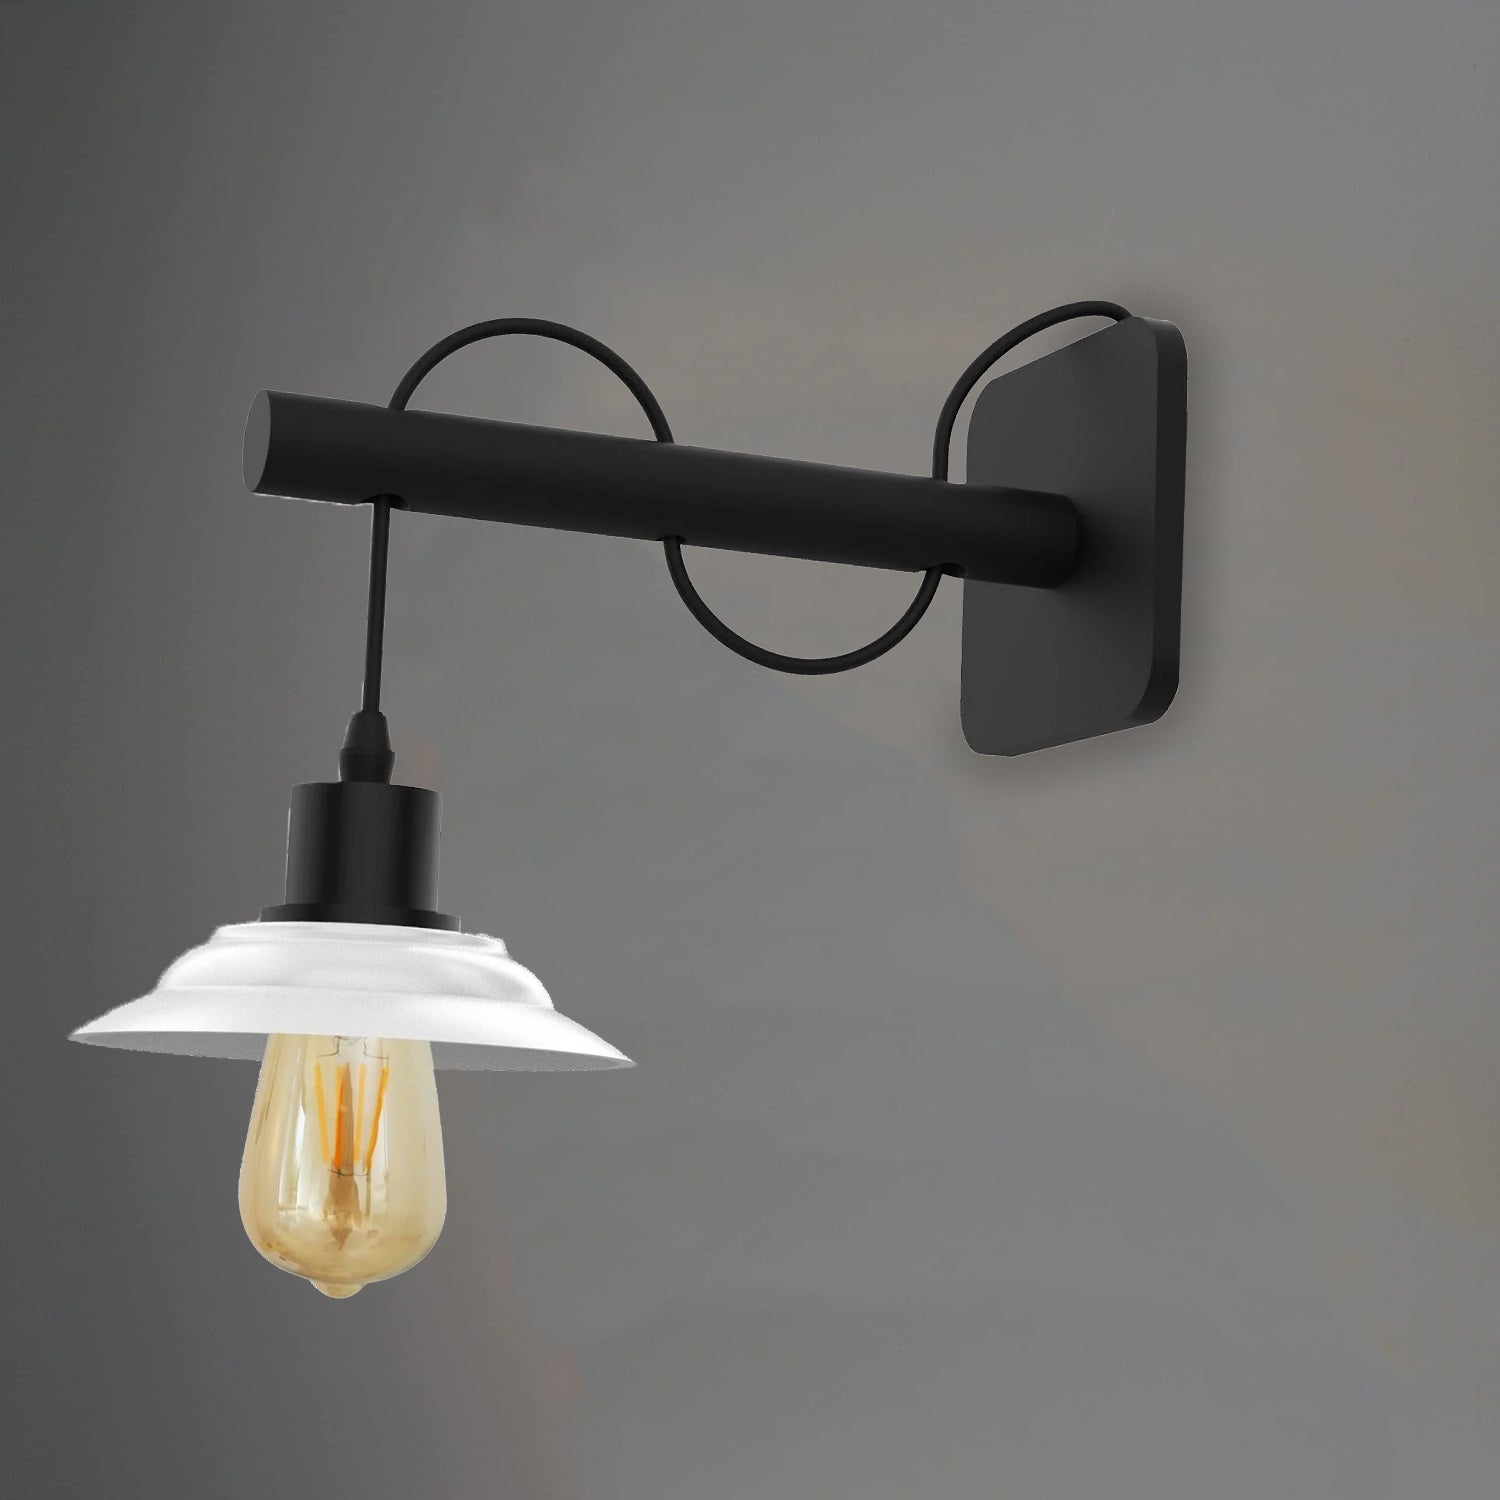 3 Pack Modern Industrial Black Scone Wall Light With White Shade with FREE Bulbs~2285